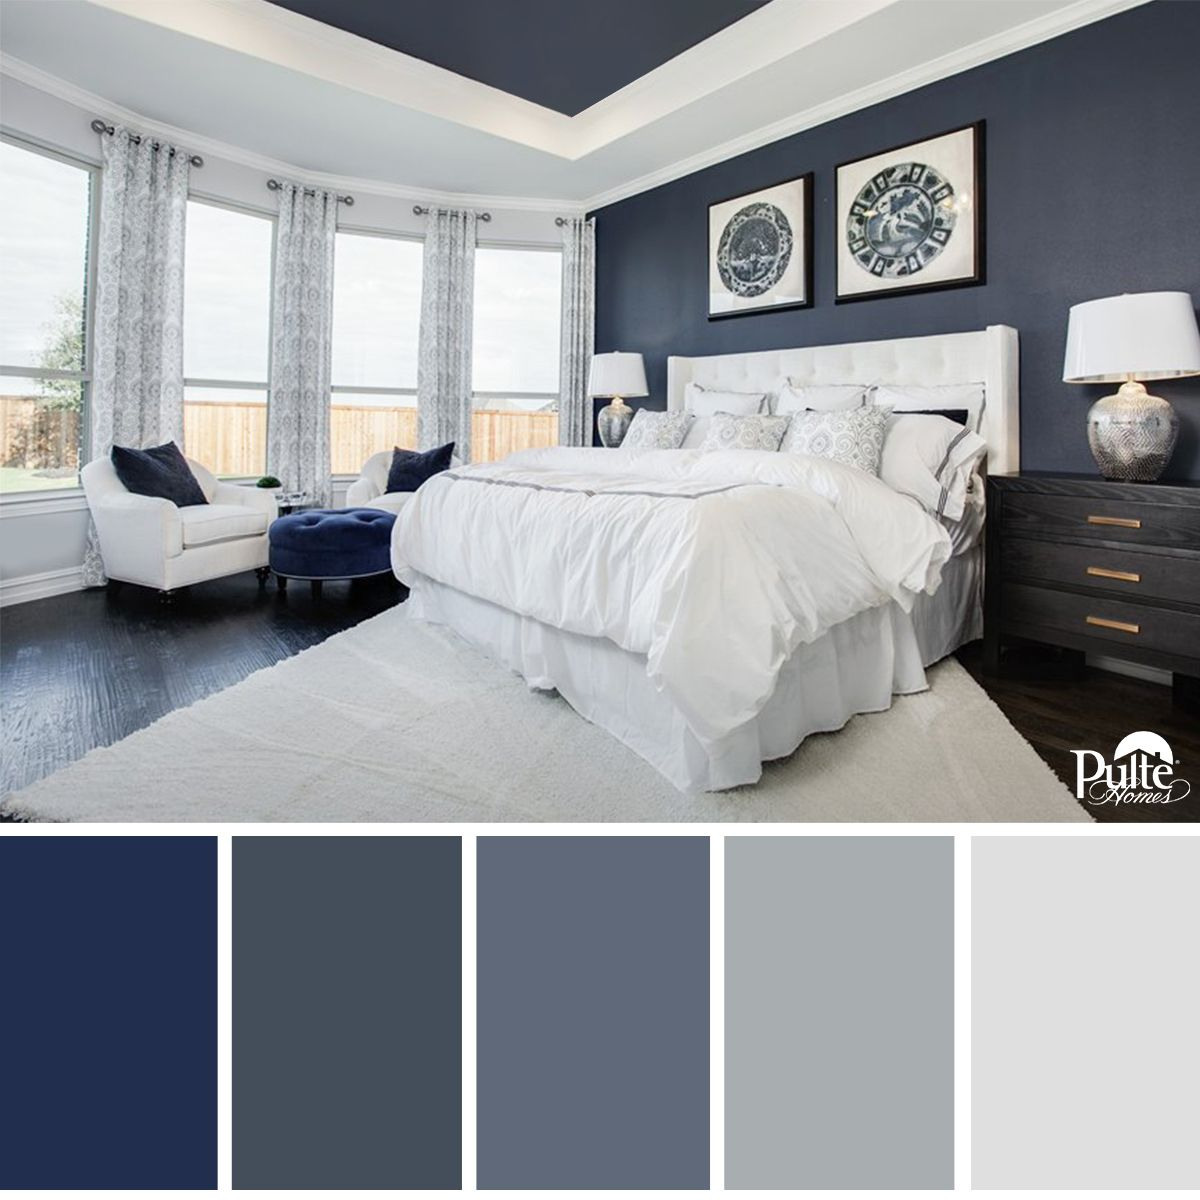 10 Unique Master Bedroom Wall Color Ideas this bedroom design has the right idea the rich blue color palette 2024